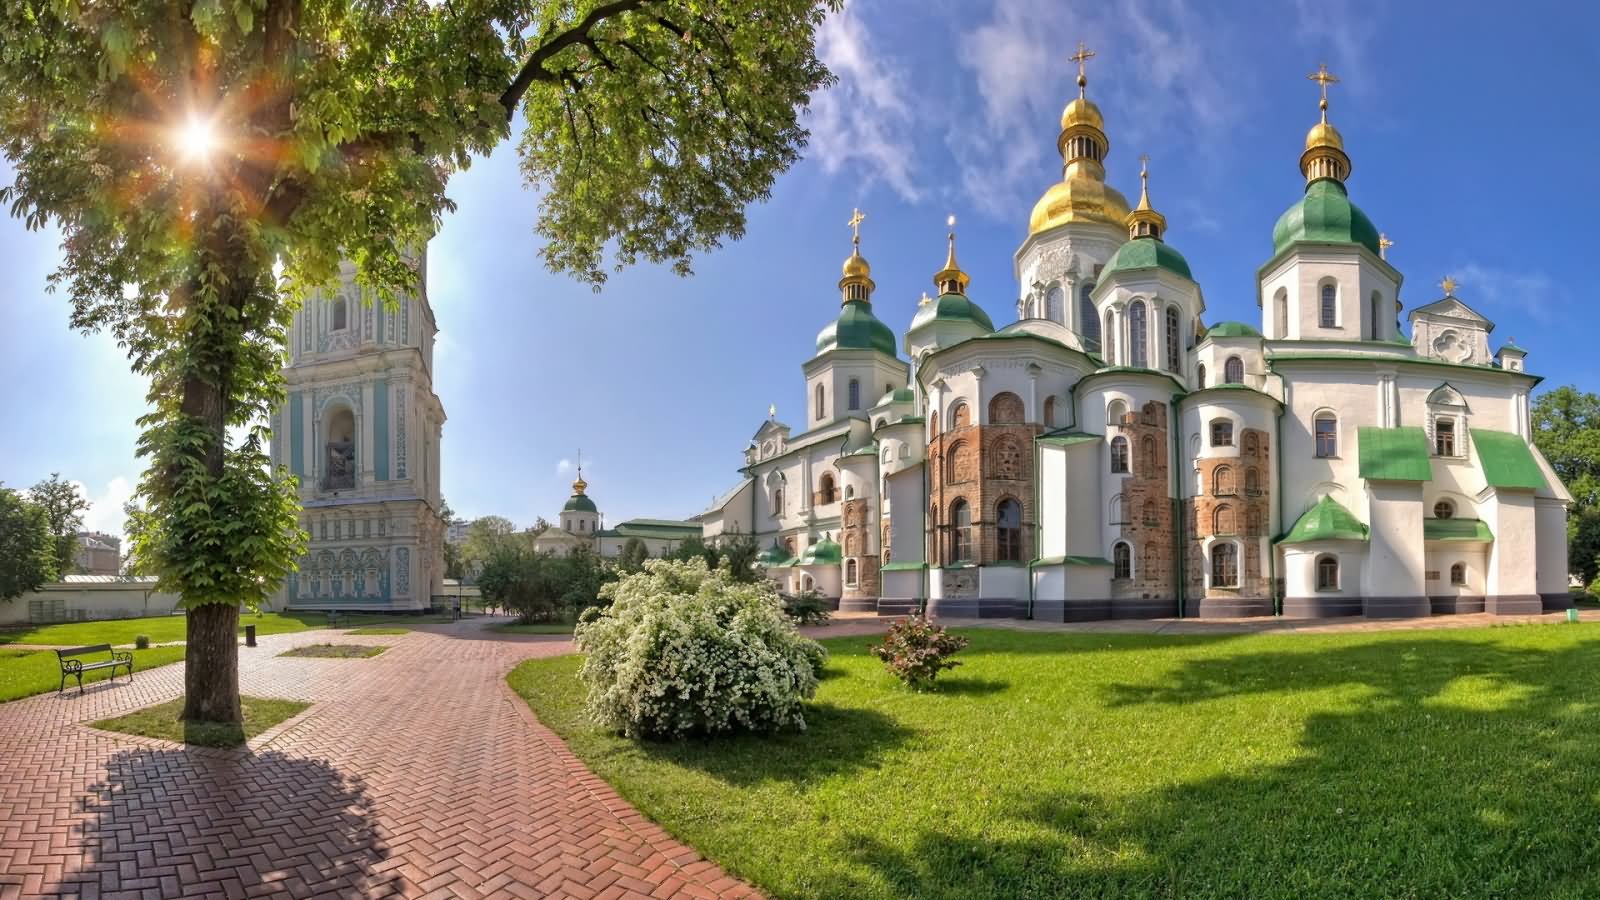 The Saint Sophia Cathedral And Bell Tower In Kiev, Ukraine